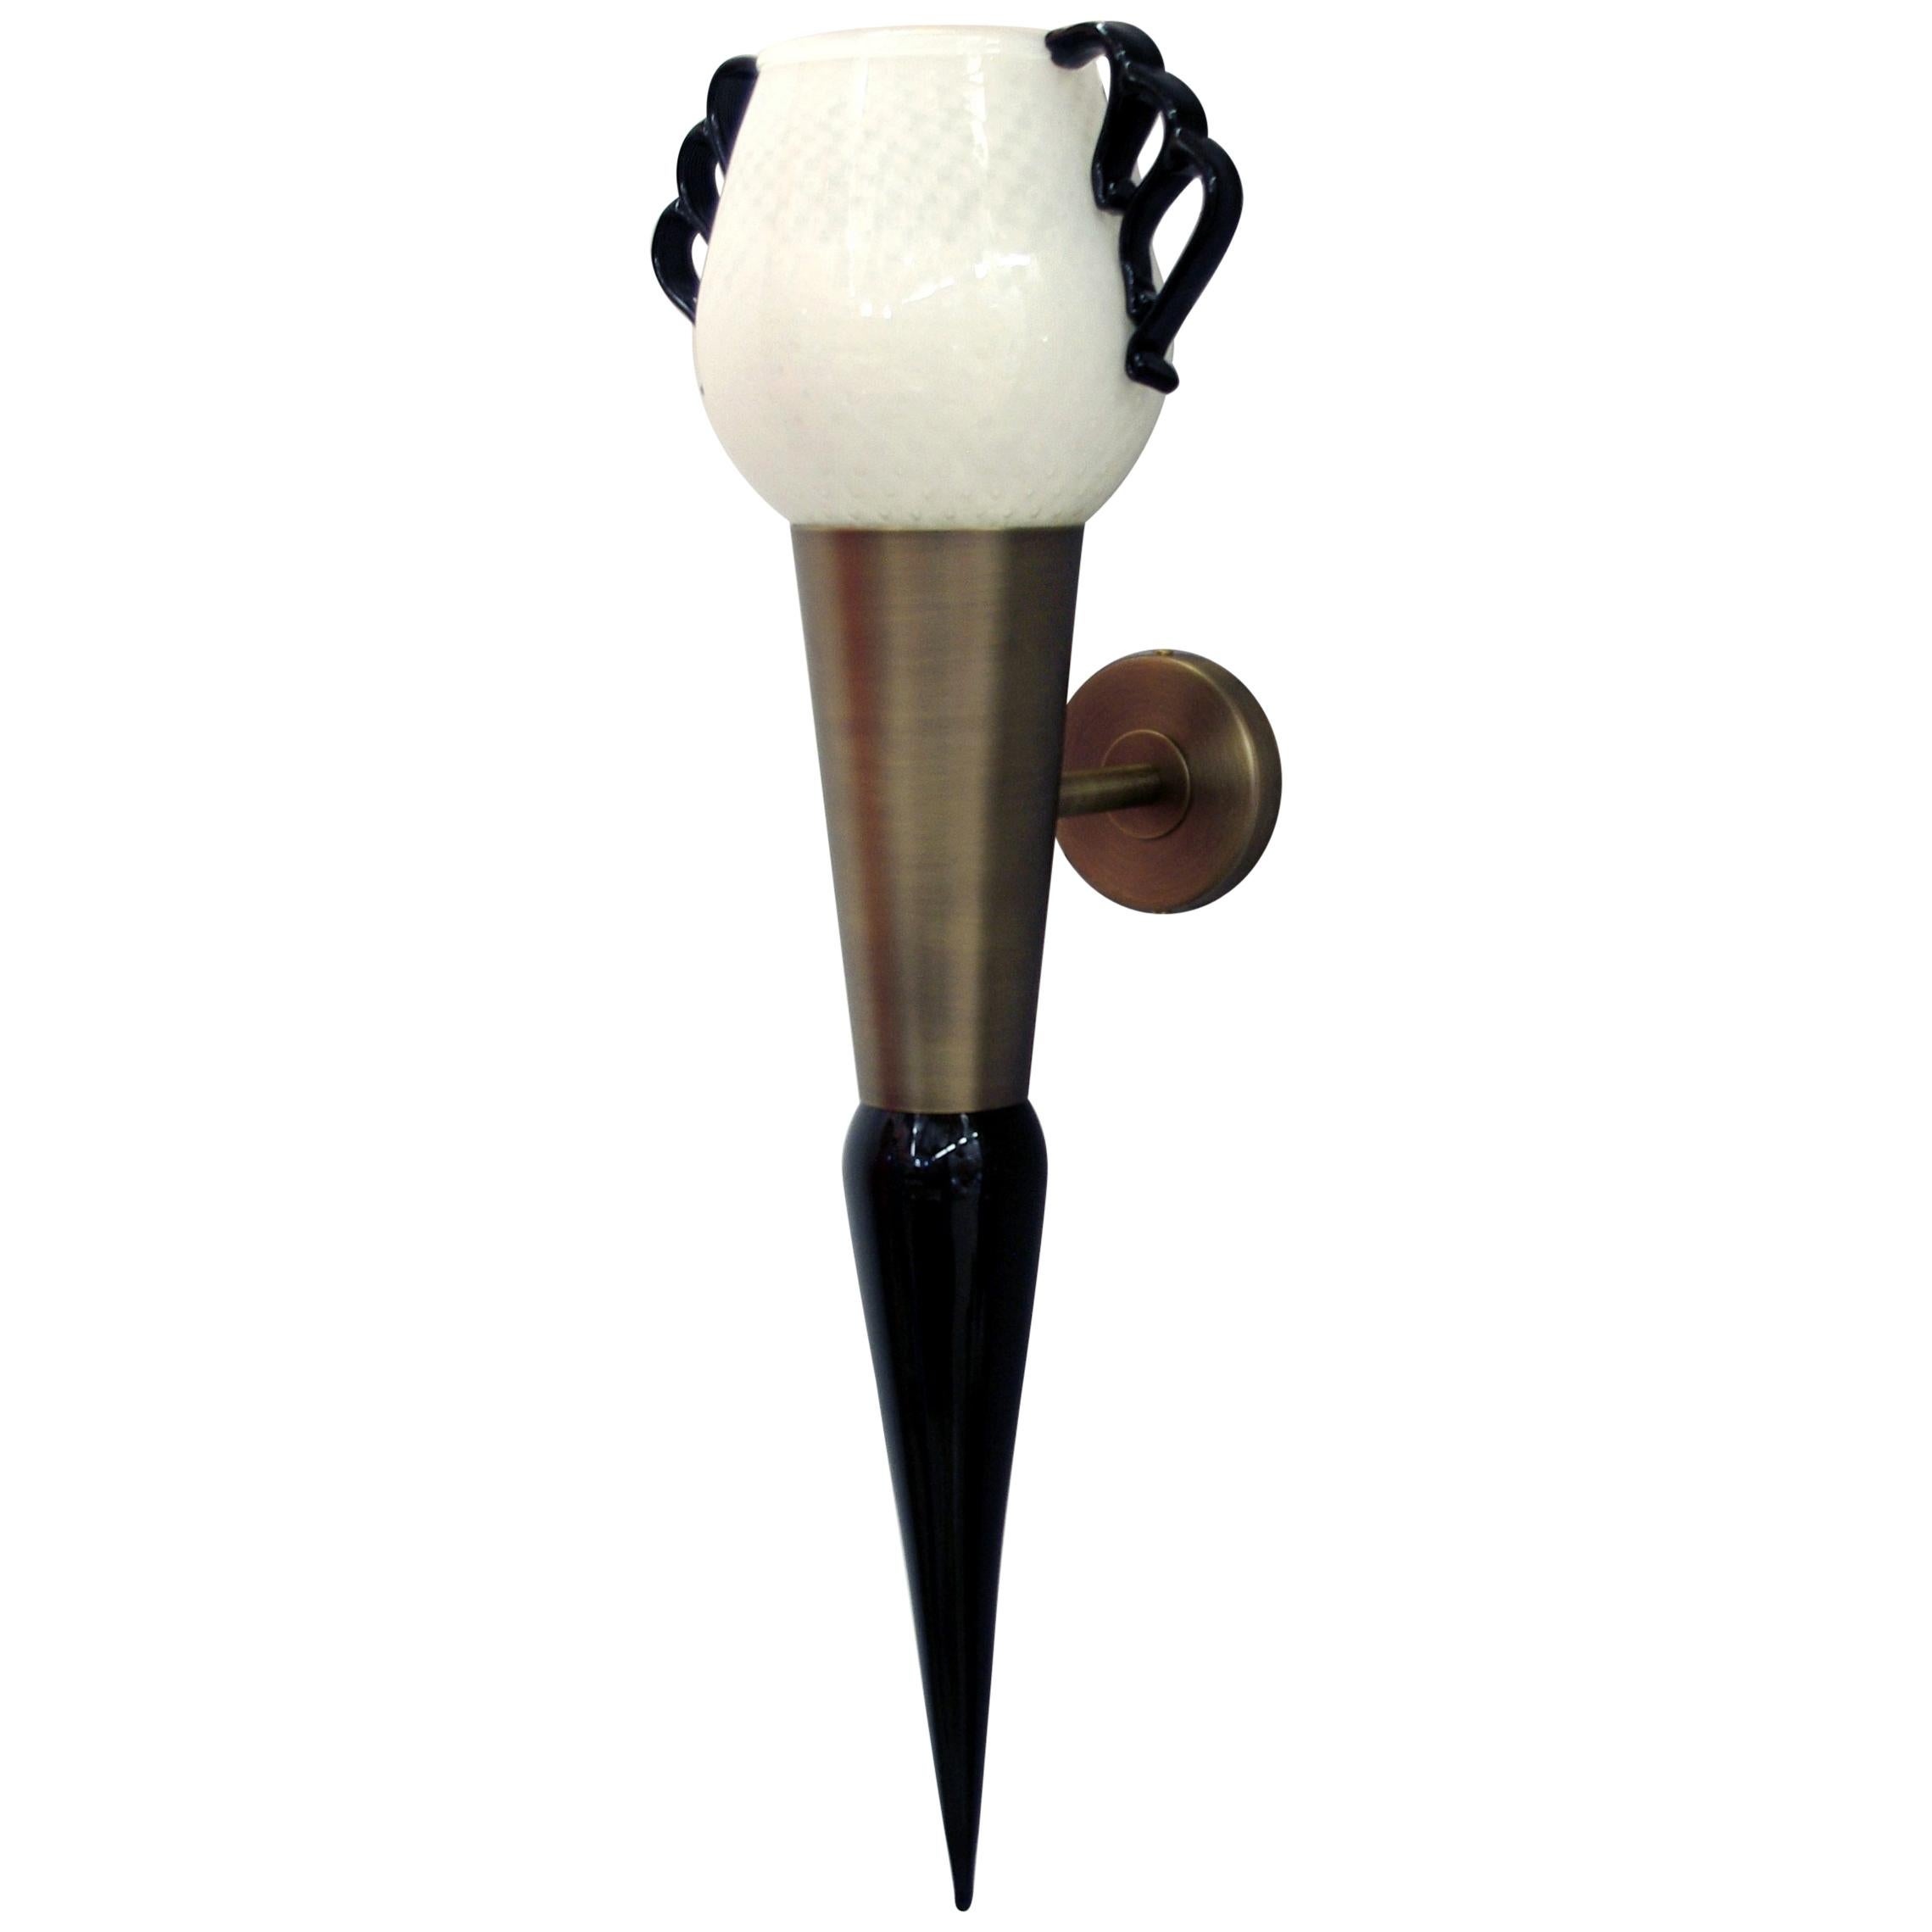 One of a kind Italian wall lights with hand blown milky white Murano glass shades with black scrolling decorations, bronzed metal finish, and black glass stem, designed by Fabio Bergomi for Fabio Ltd / Made in Italy
1 light / E26 or E27 / max 60W